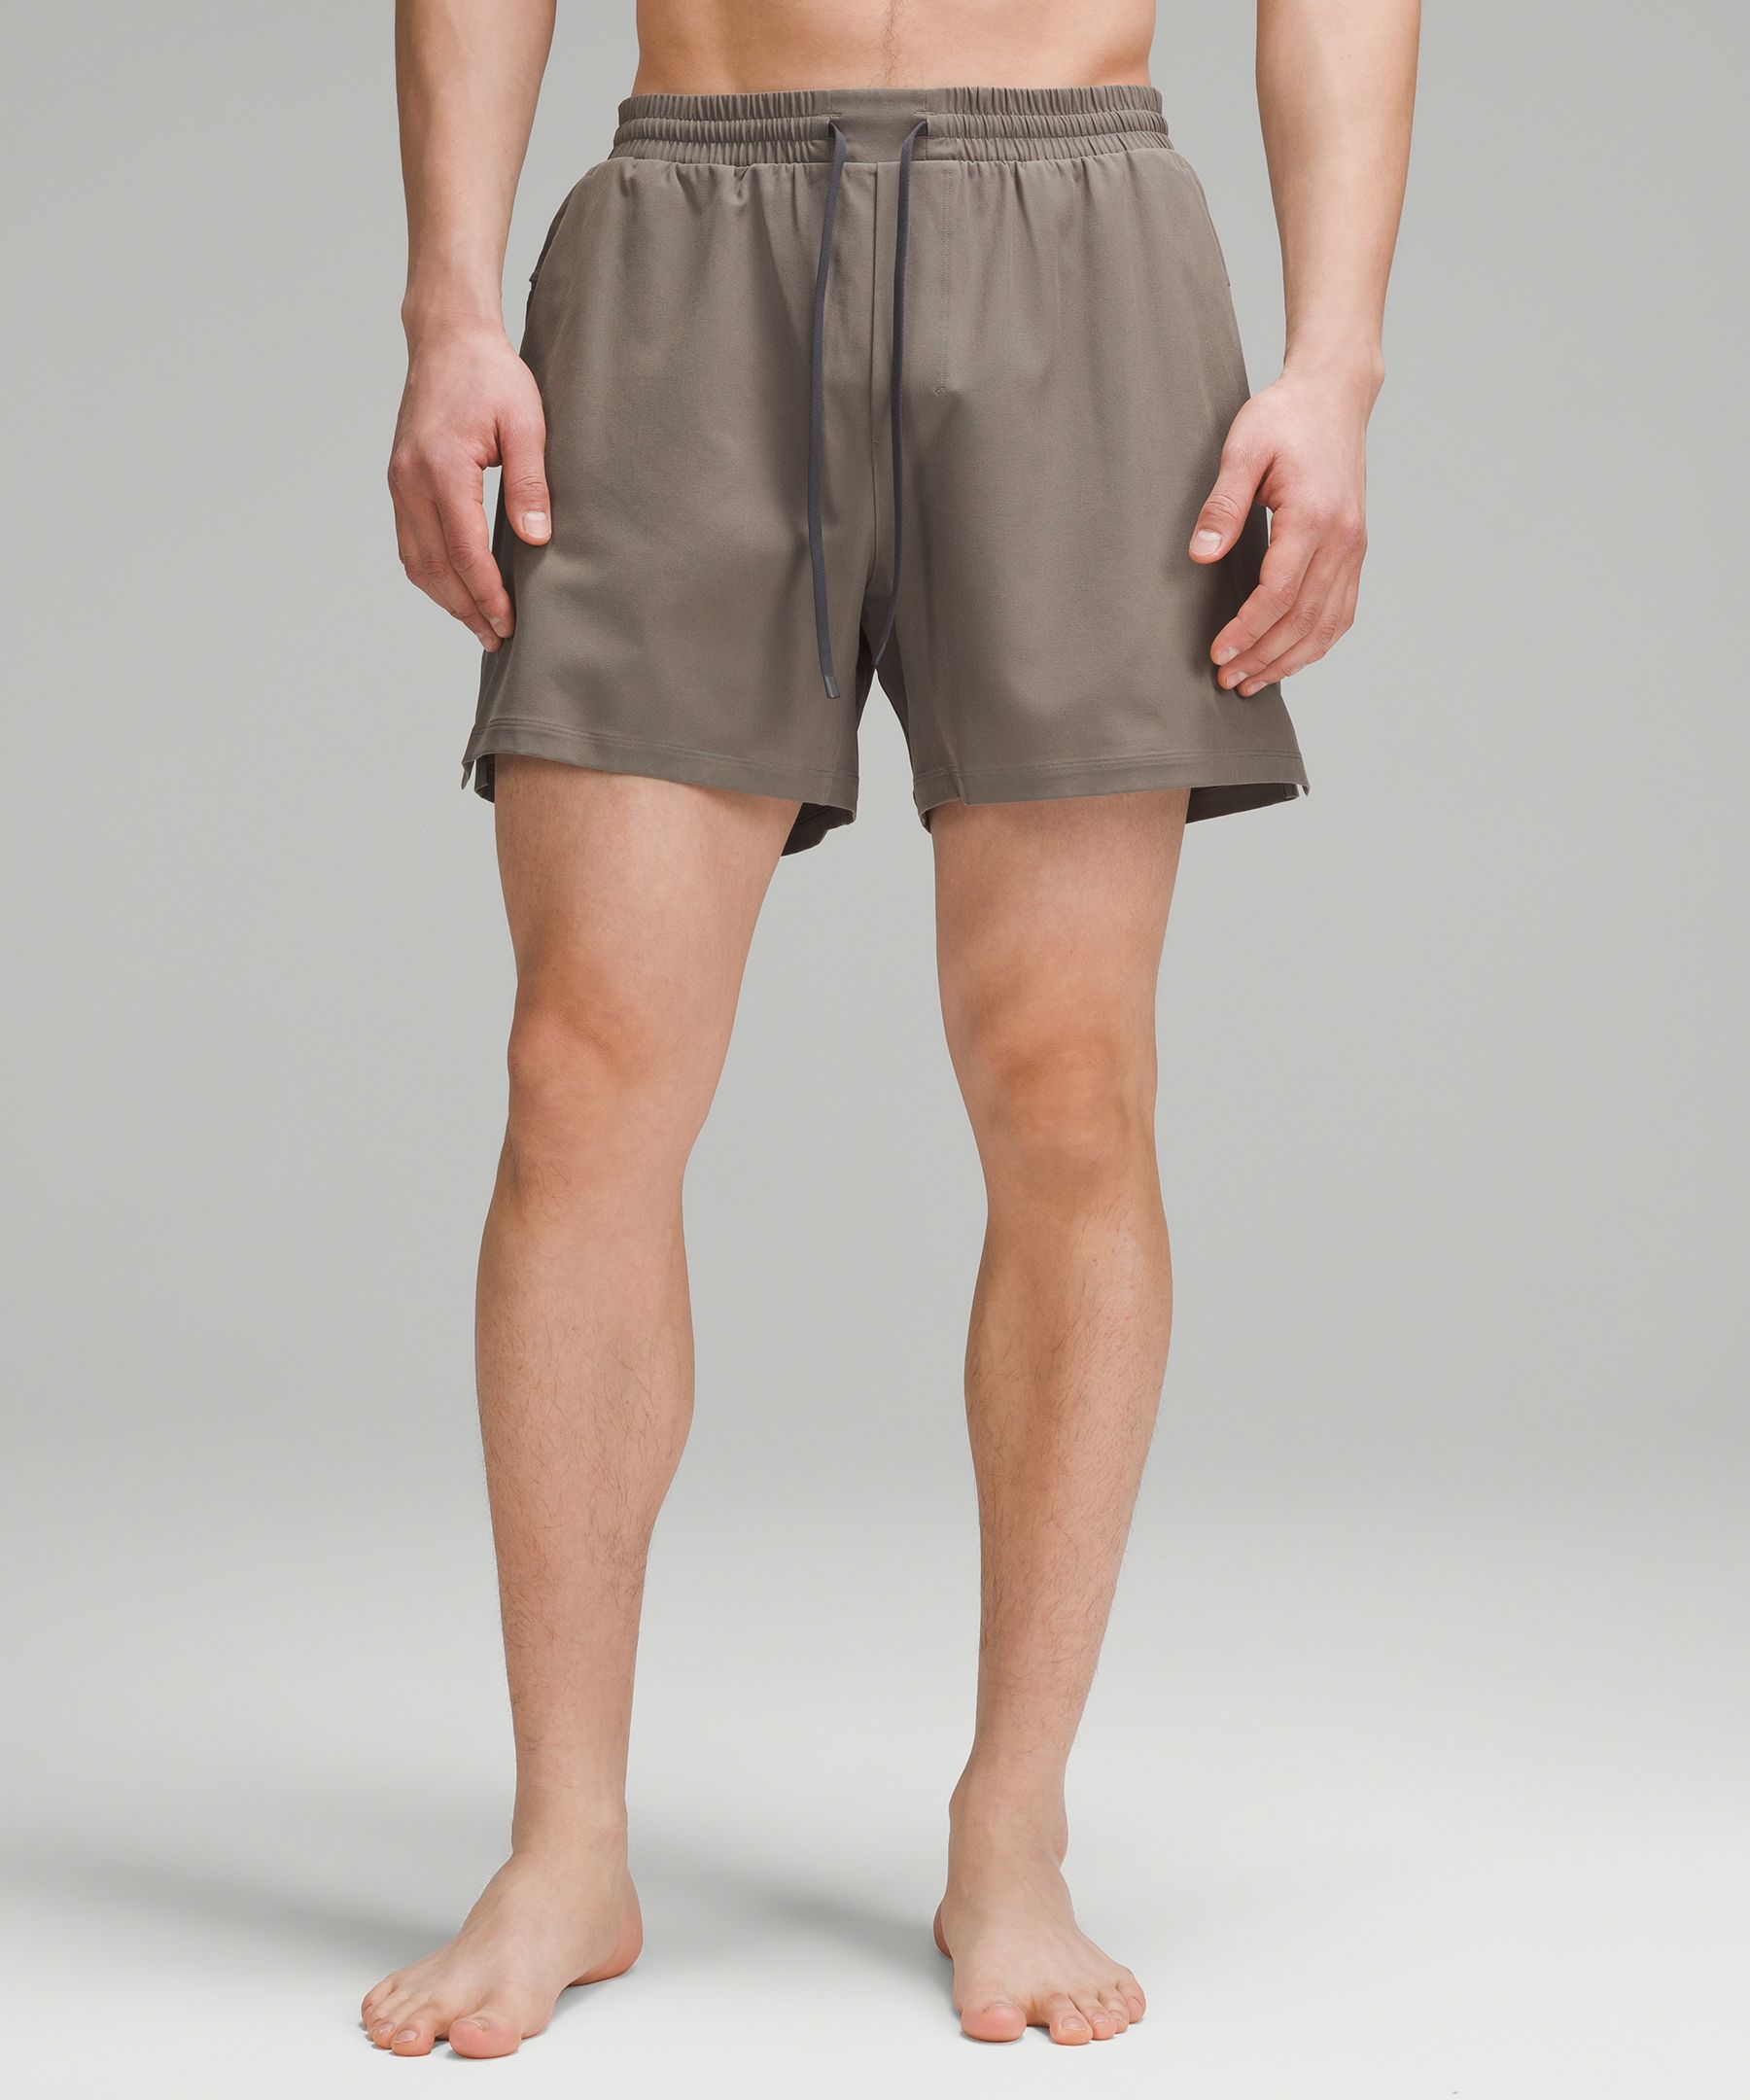 Lululemon Pool Shorts 5" Lined In Gray